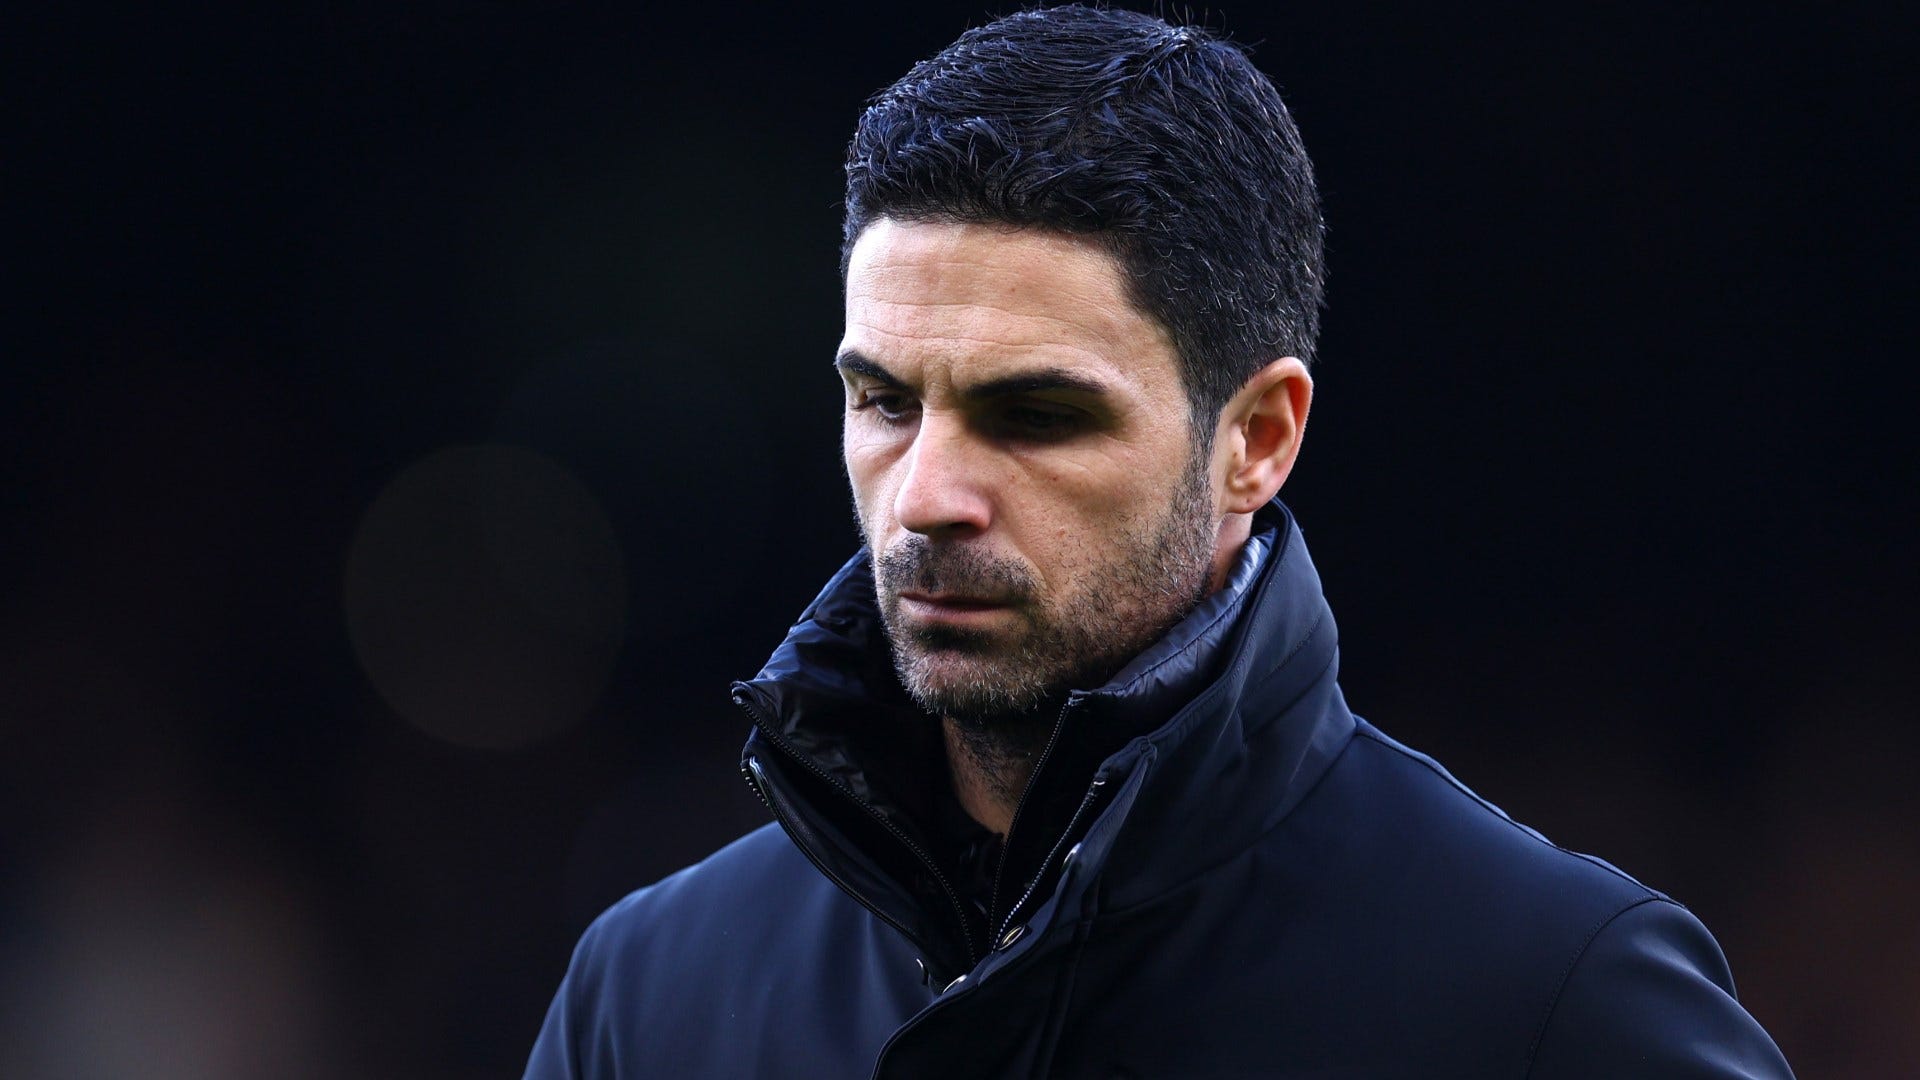 Mikel Arteta to take the Jurgen Klopp route?! Shocking new report claims Arsenal boss is considering stepping down in the summer amid links with Barcelona